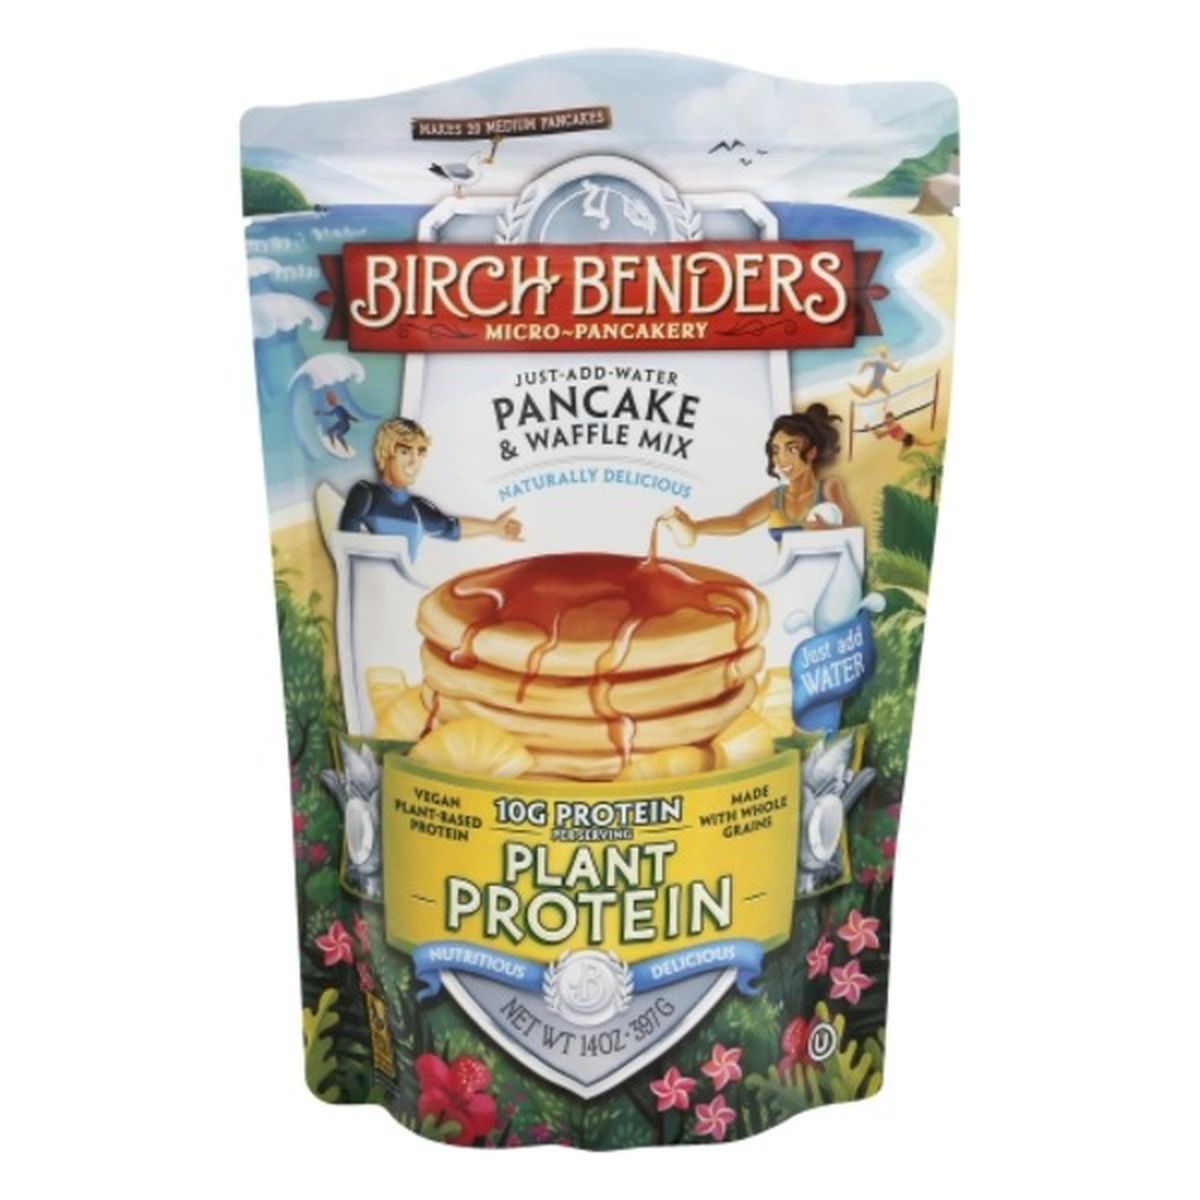 Calories in Birch Benders Pancake & Waffle Mix, Plant Protein